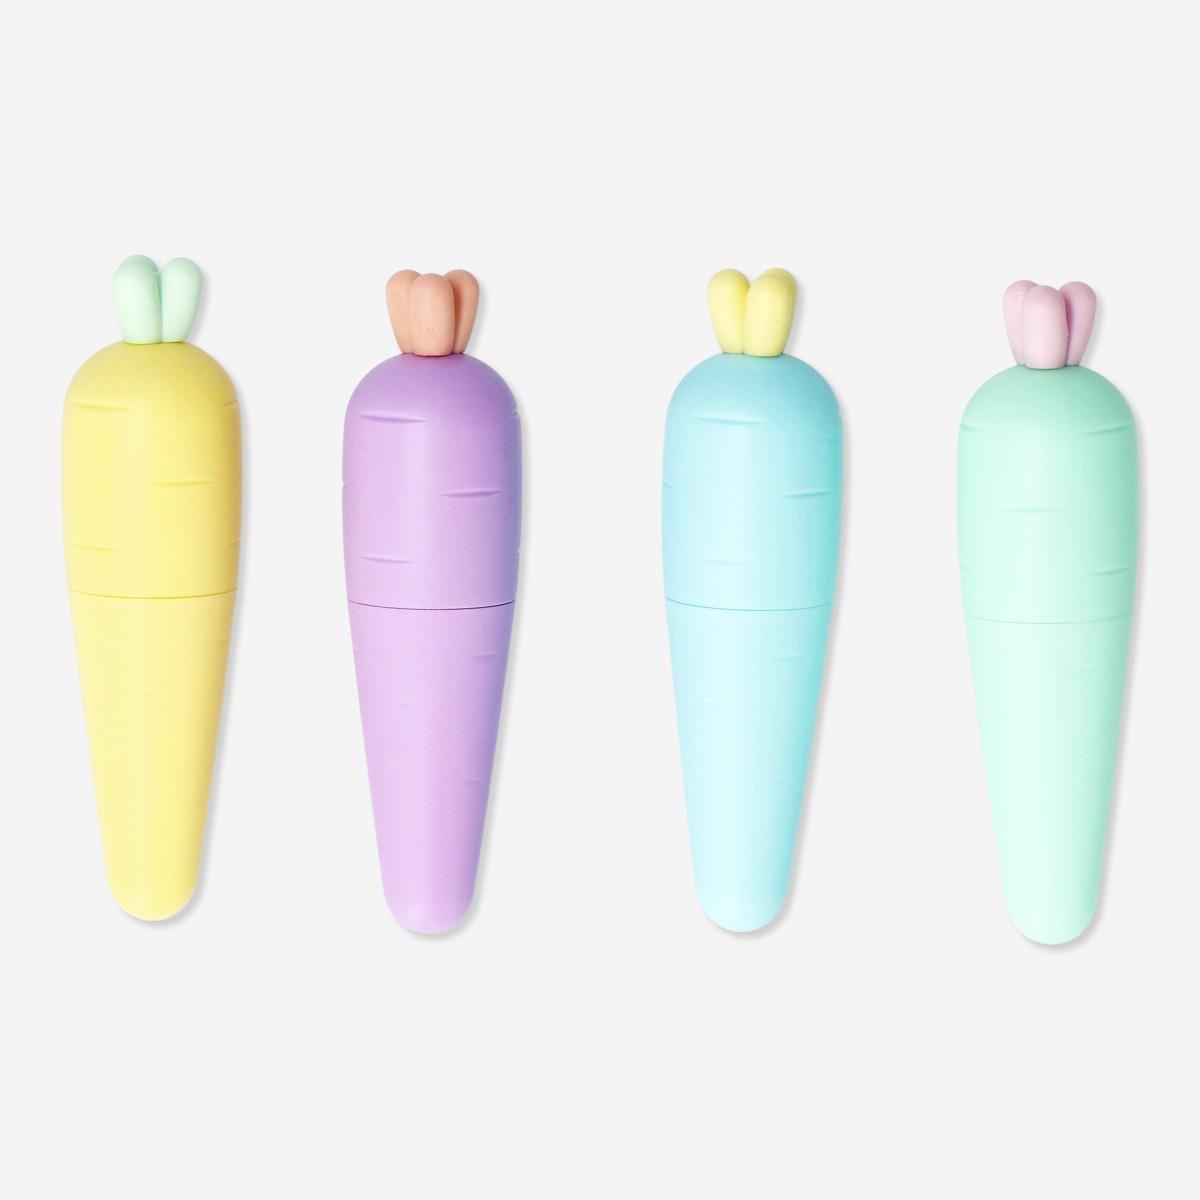 Multicolour carrot highlighters. 4 pcs